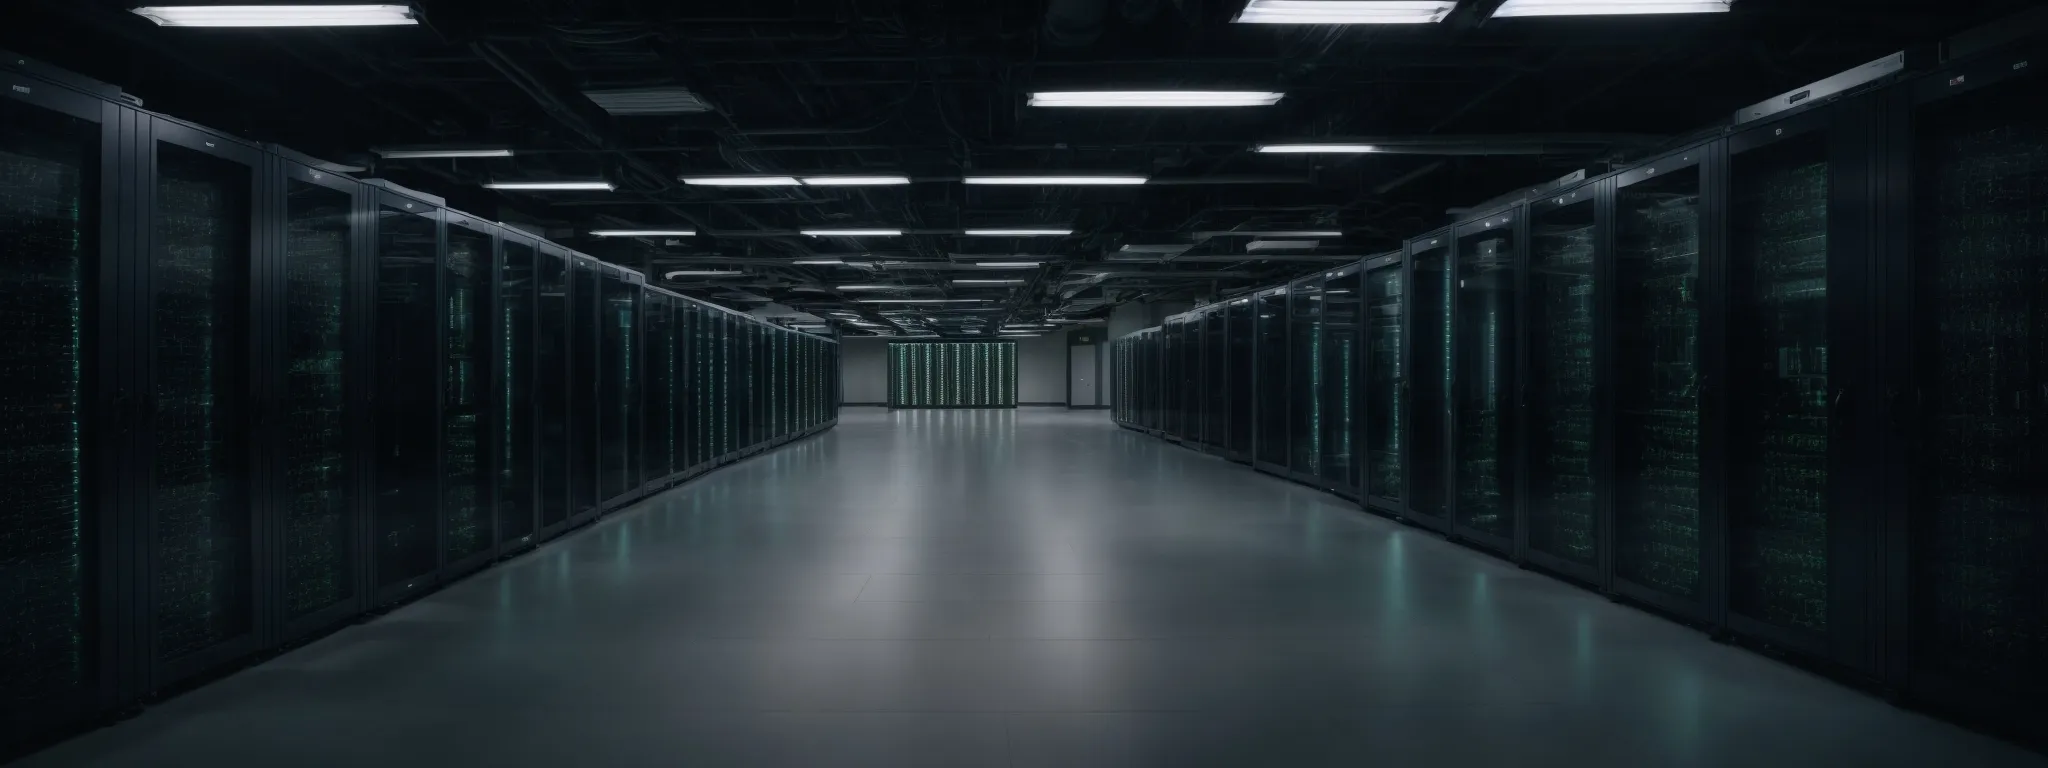 a secure data center room with rows of servers and a clear pathway indicating controlled access.